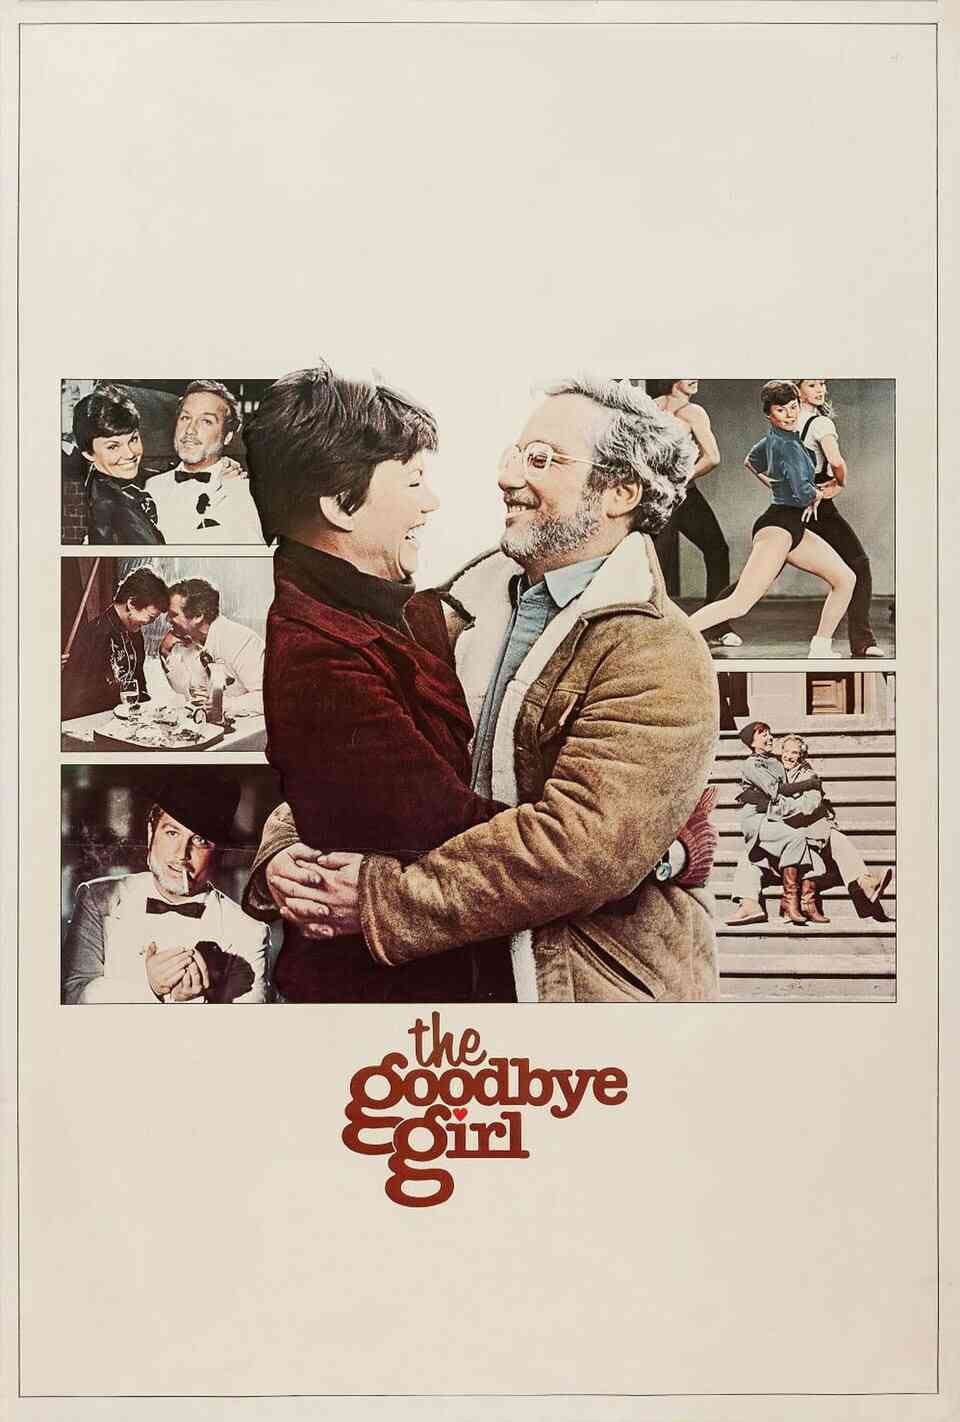 Read The Goodbye Girl screenplay (poster)